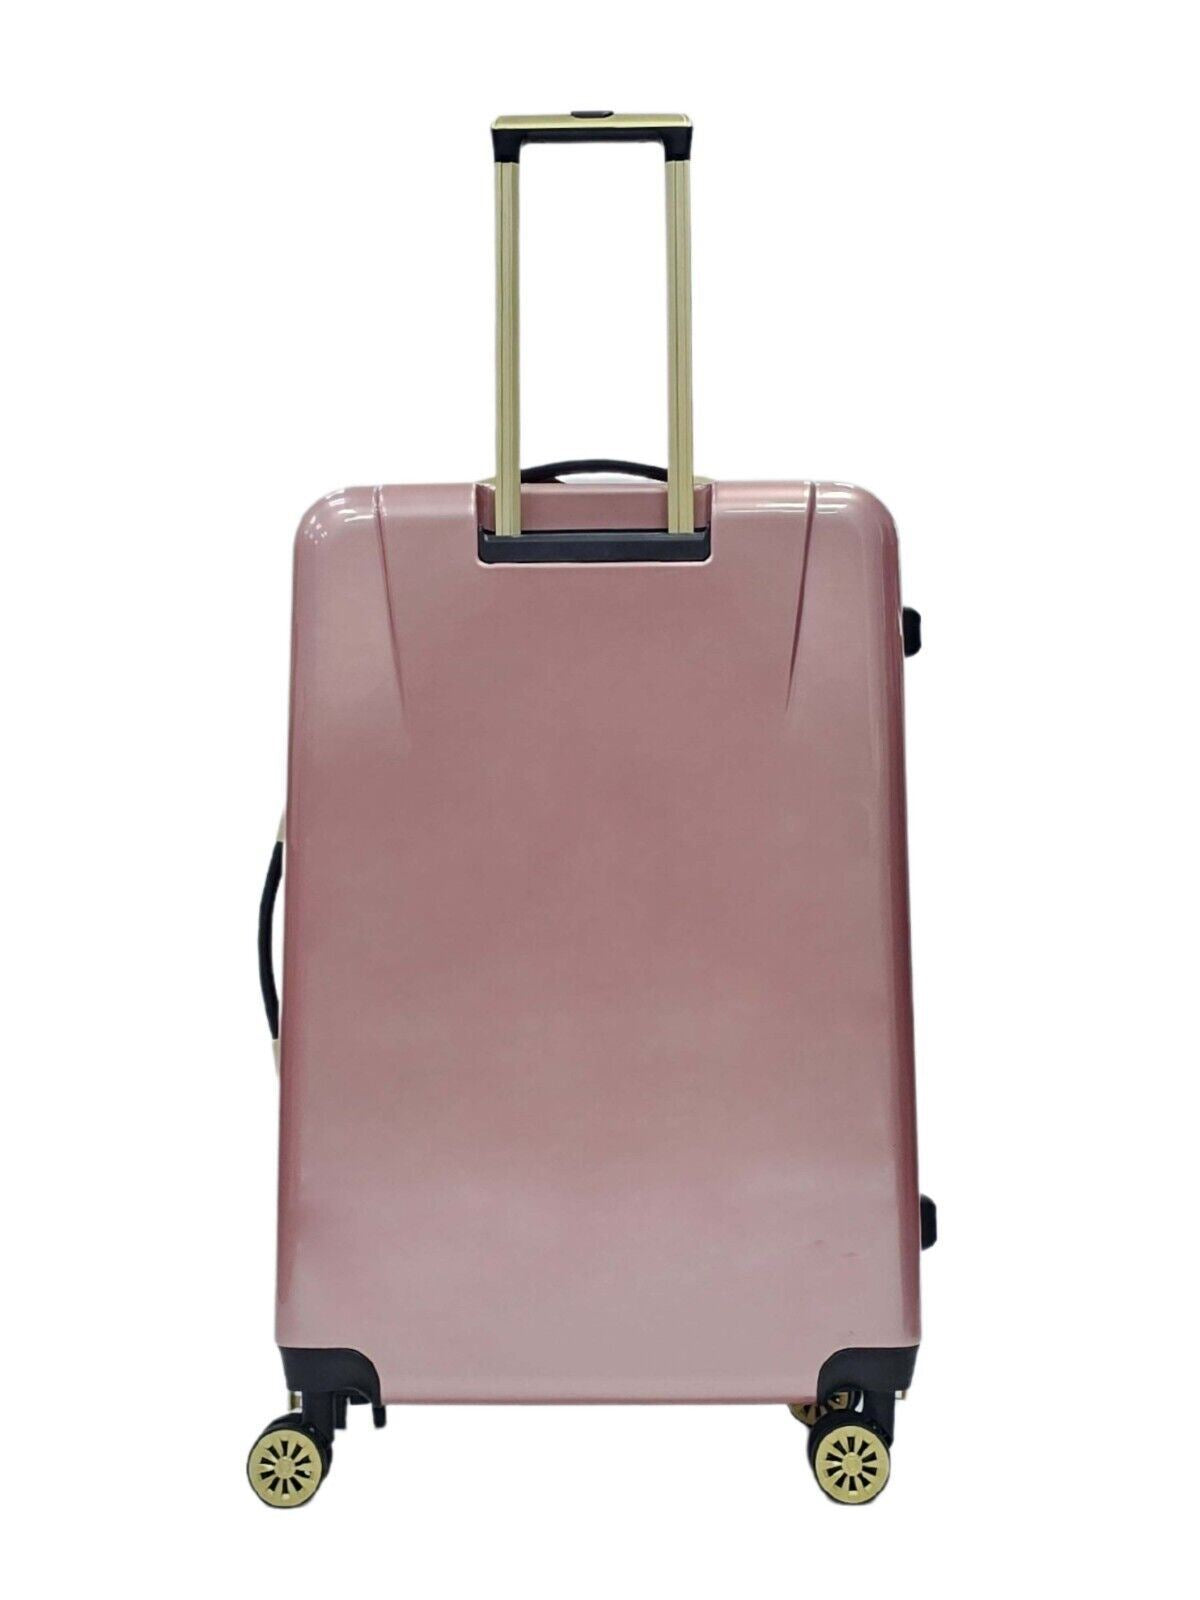 Hard Shell Pink 4 Wheel Suitcase Flower Print Luggage Cabin